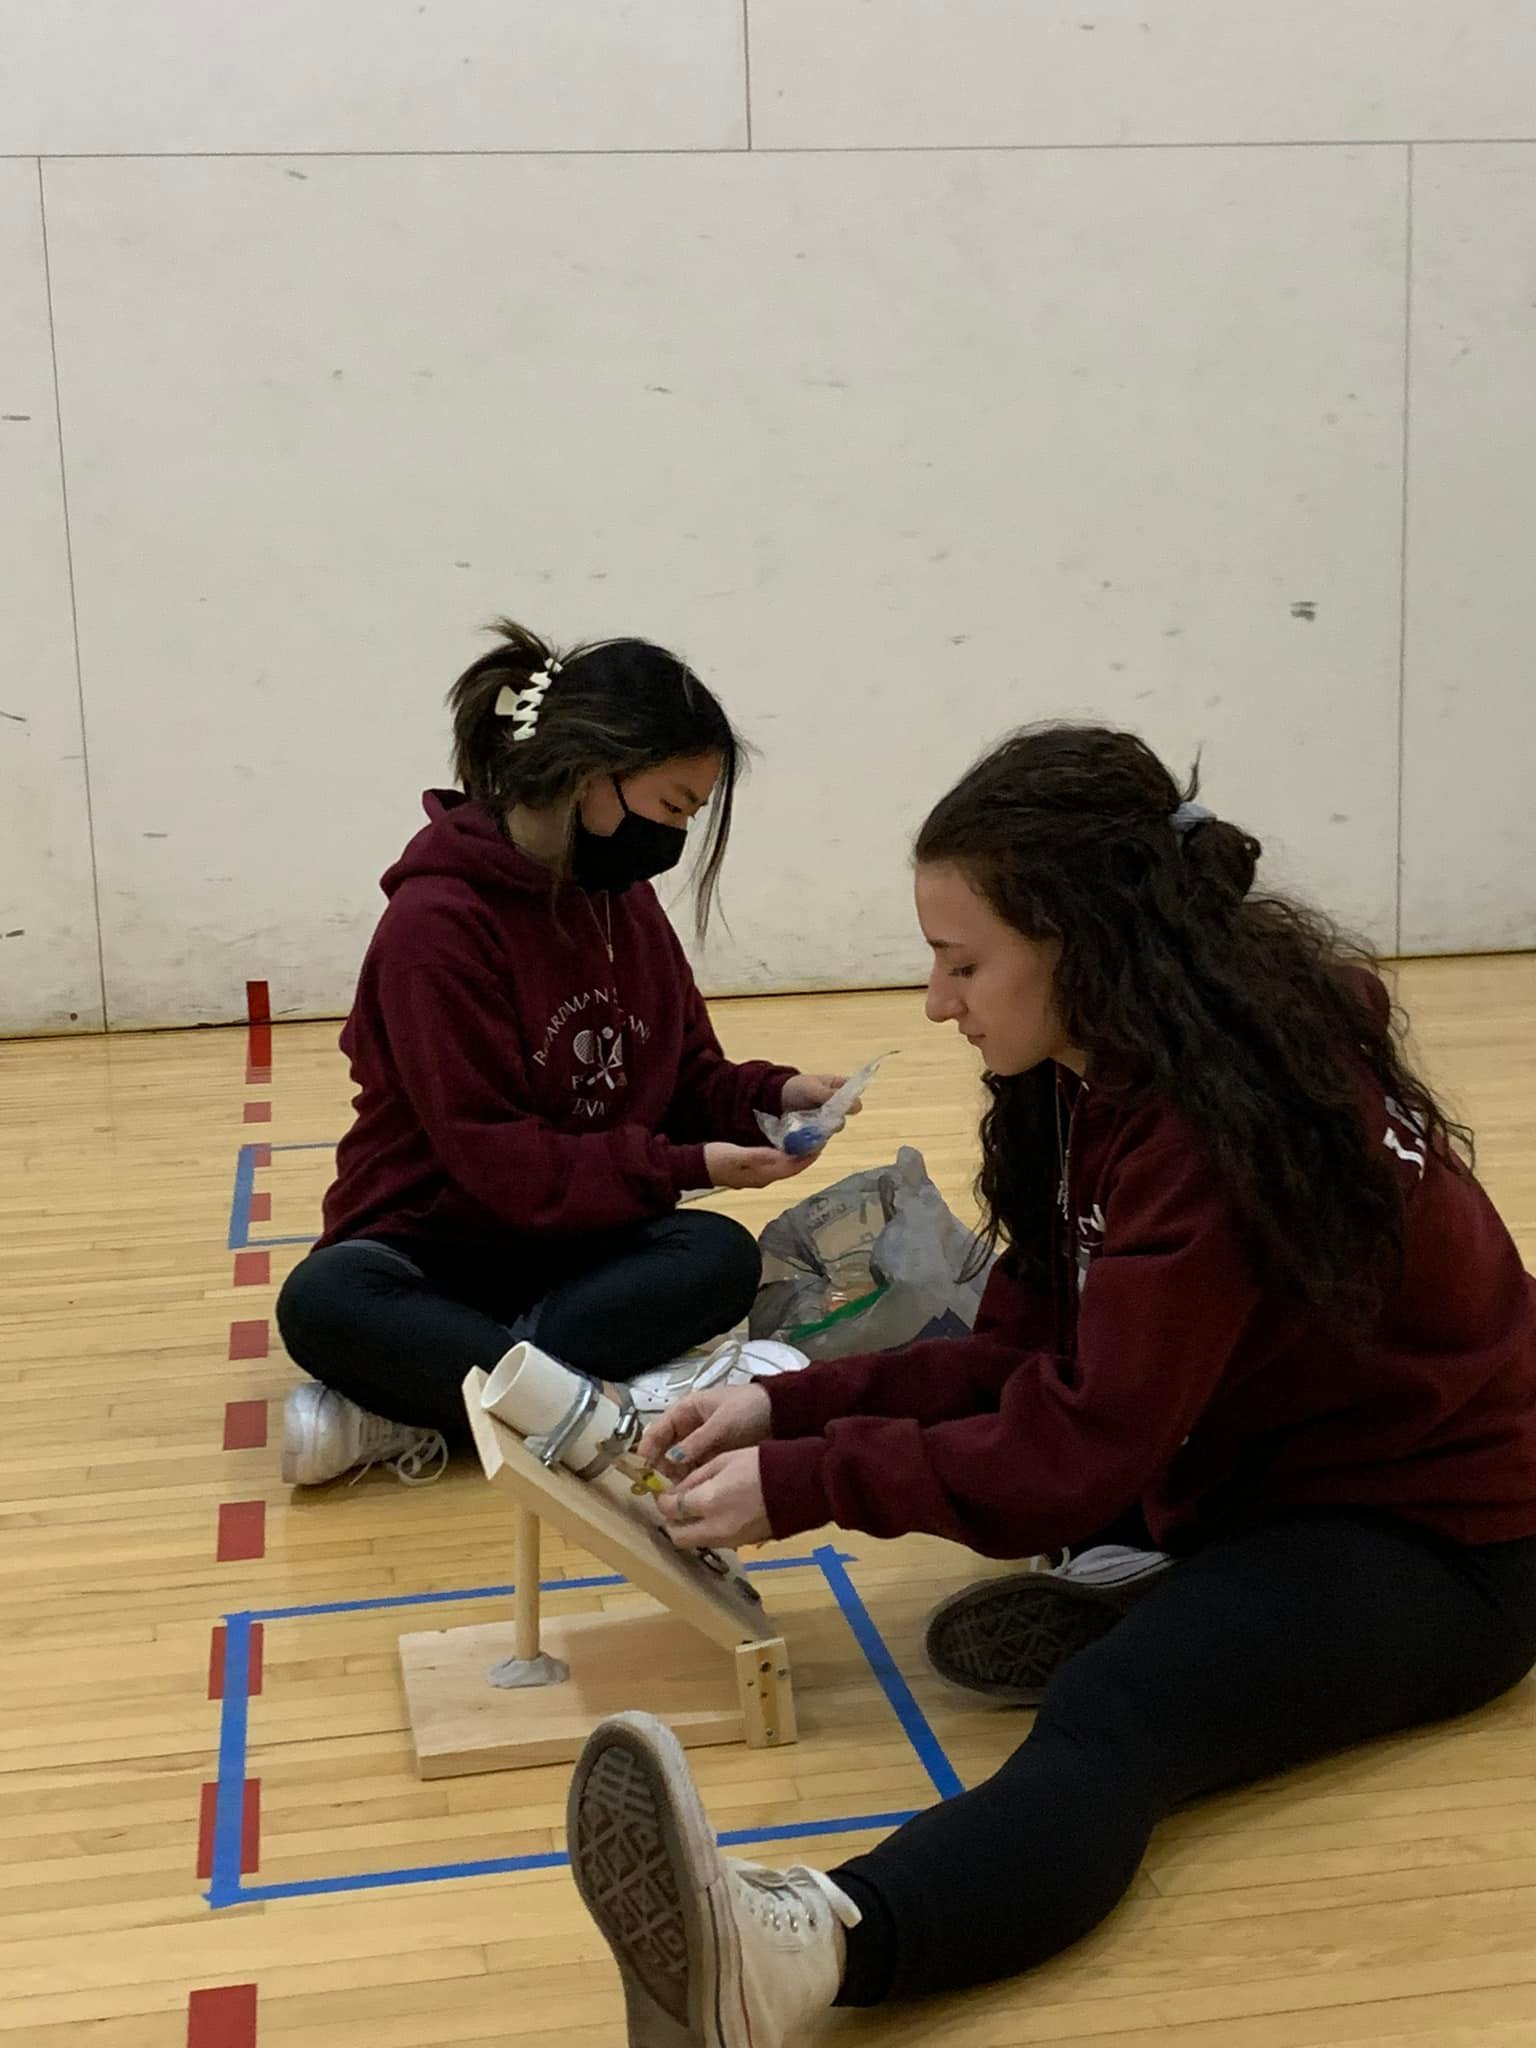 Students compete at physics olympics